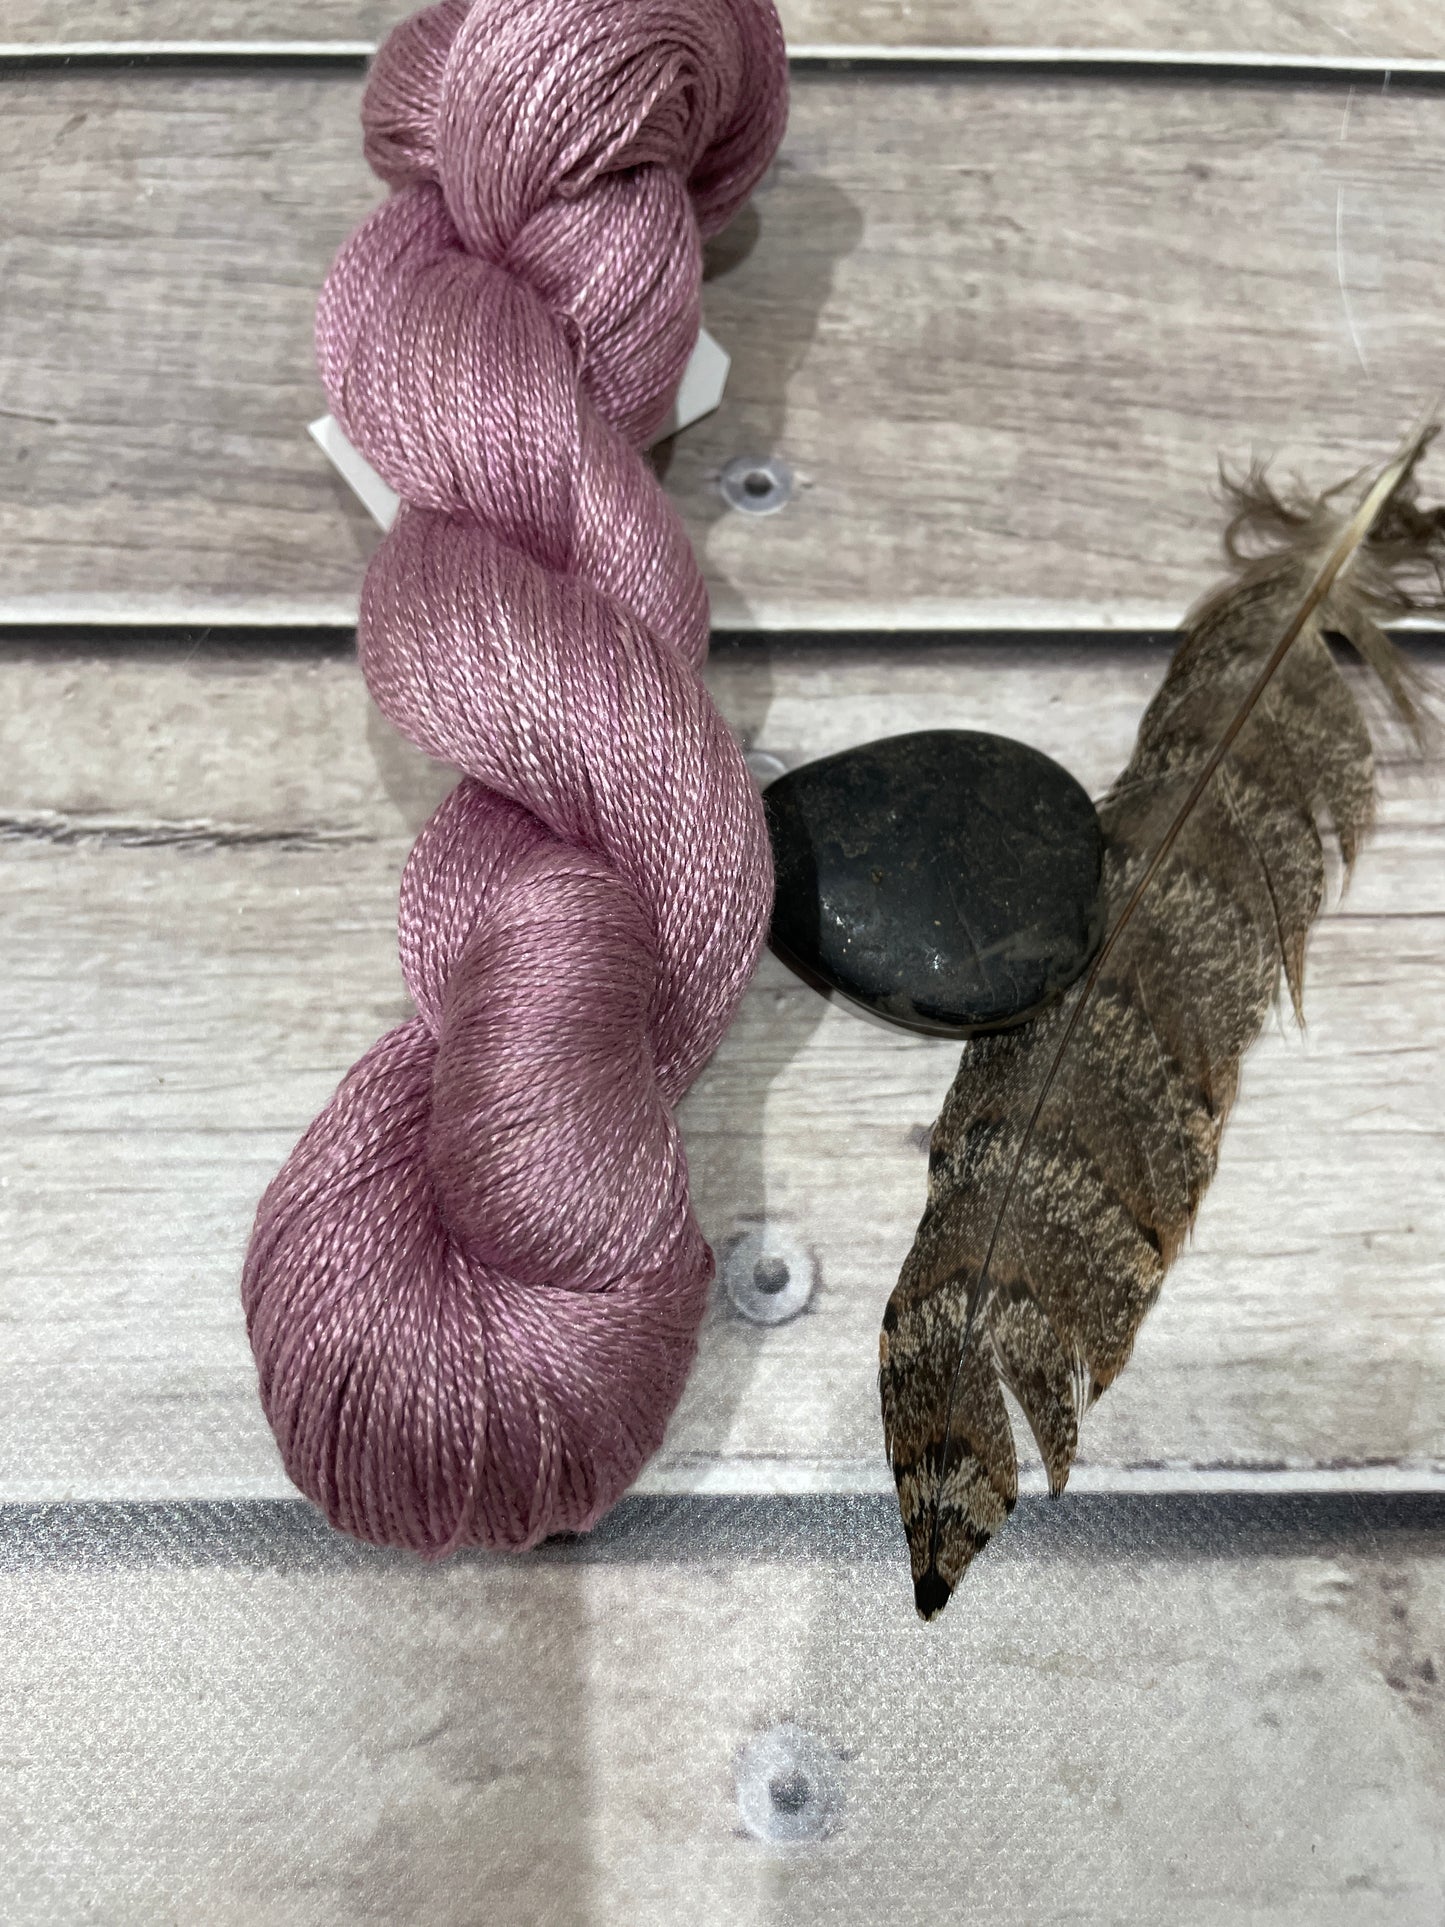 Tea Rose - 3 ply in Mulberry silk - Ginseng (hl)